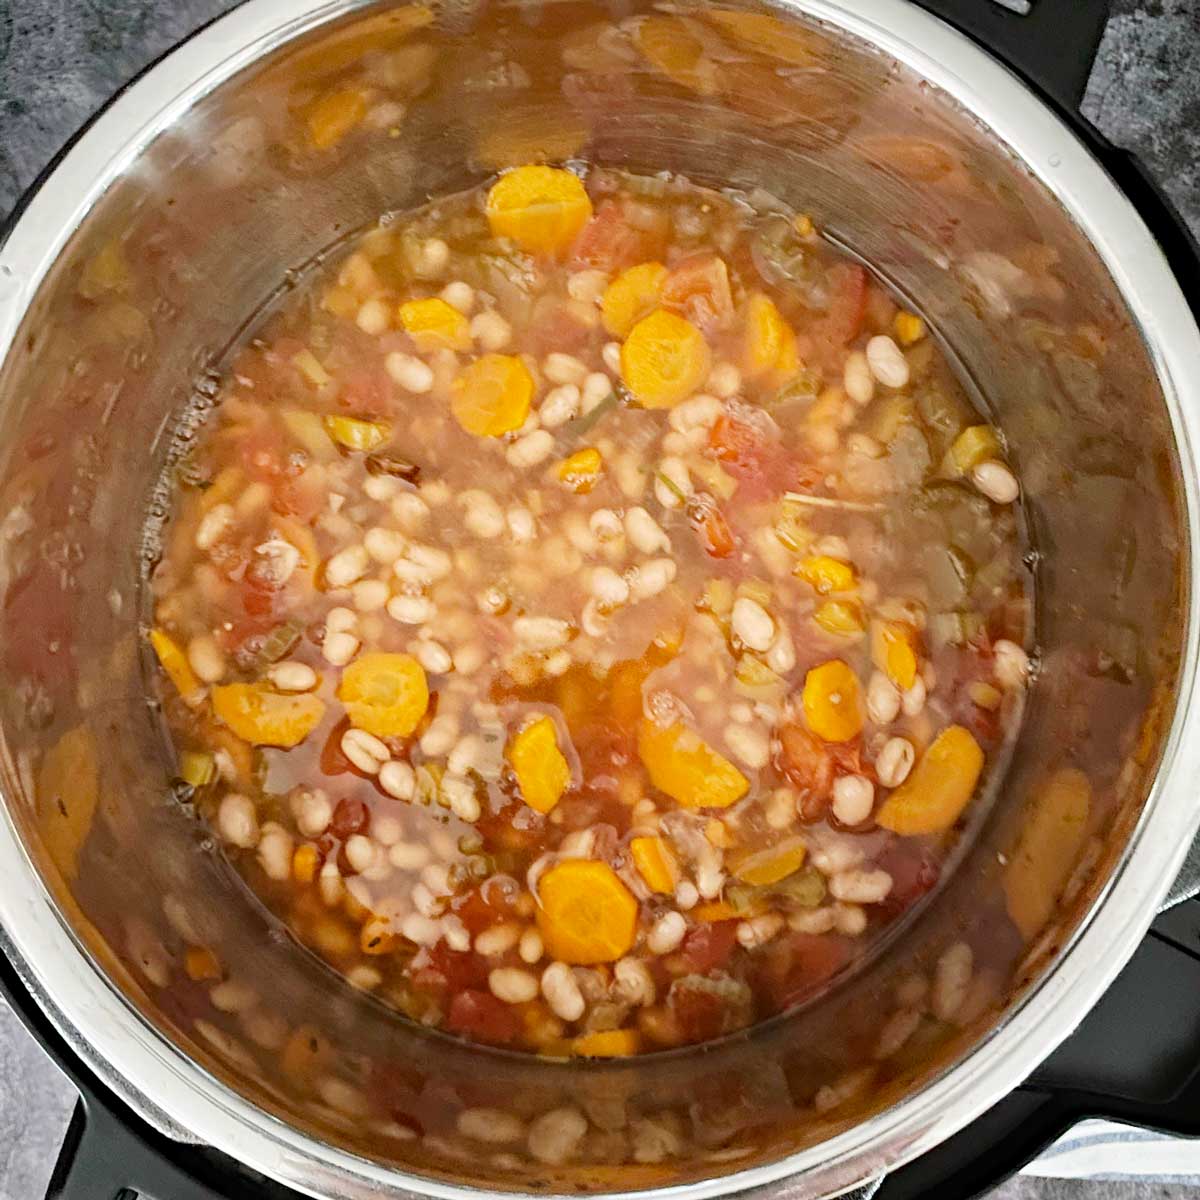 Pressure cooked navy beans soup.